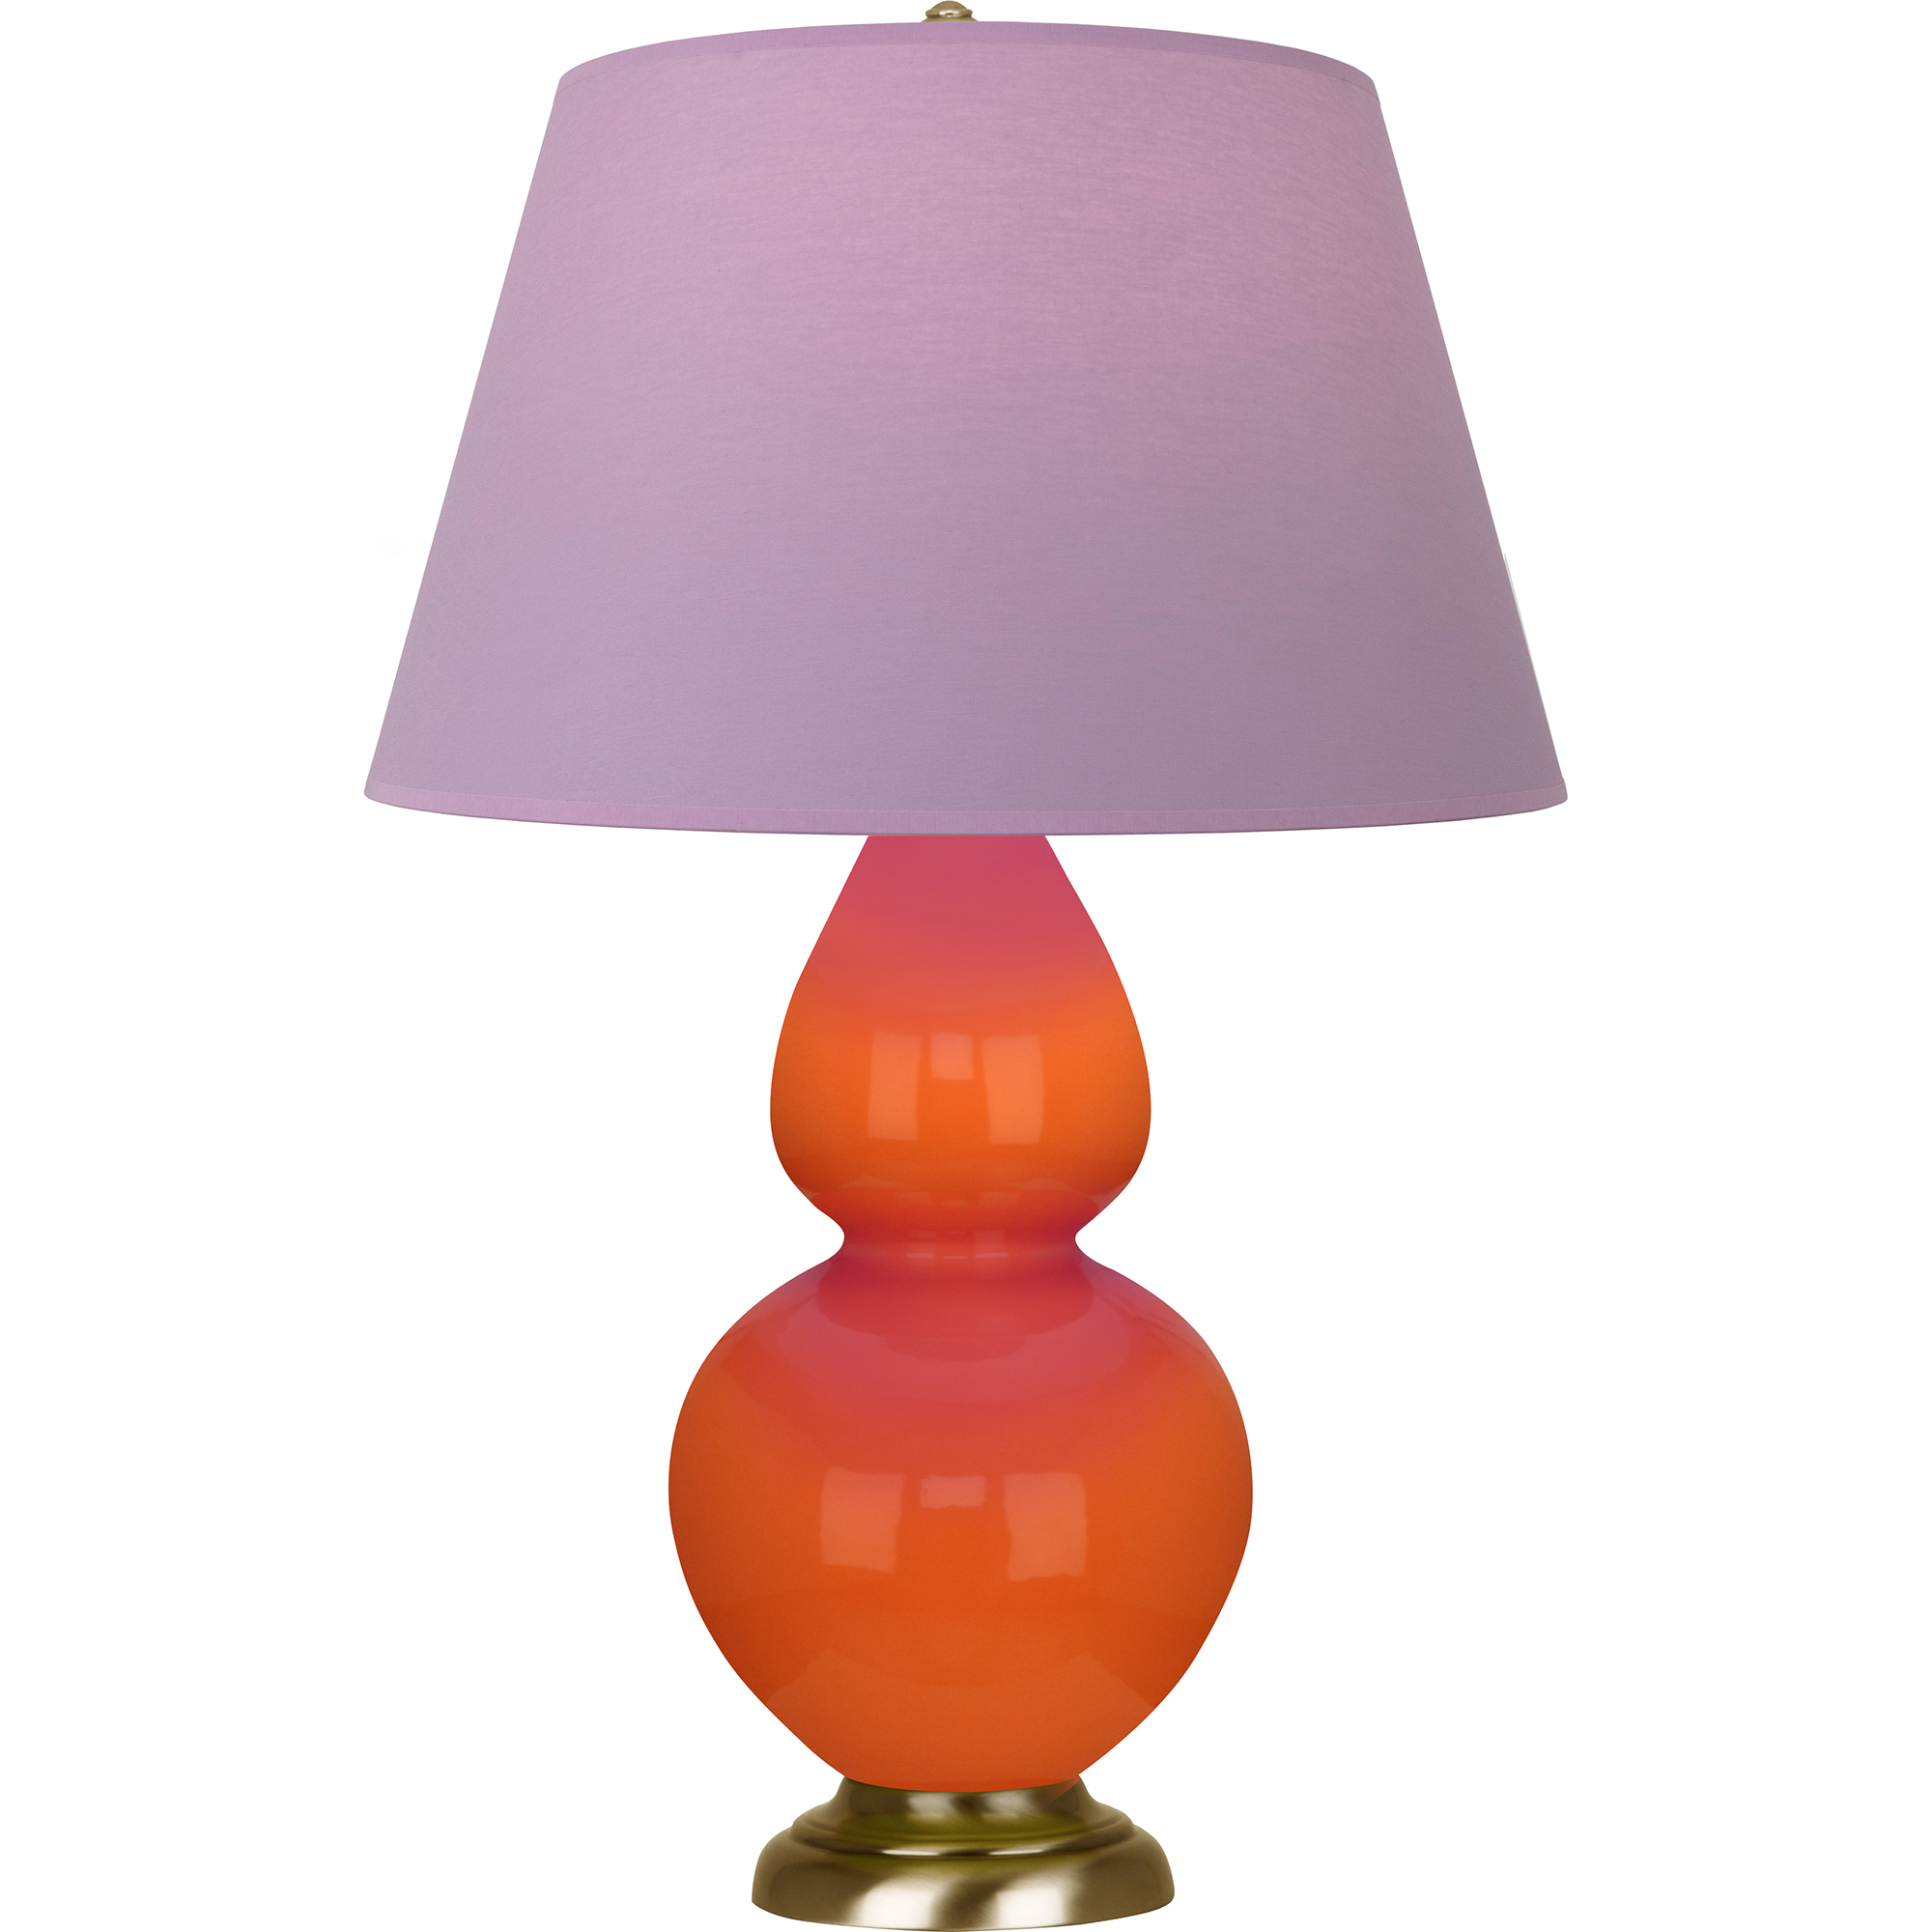 Double Gourd Table Lamp Style #1665L